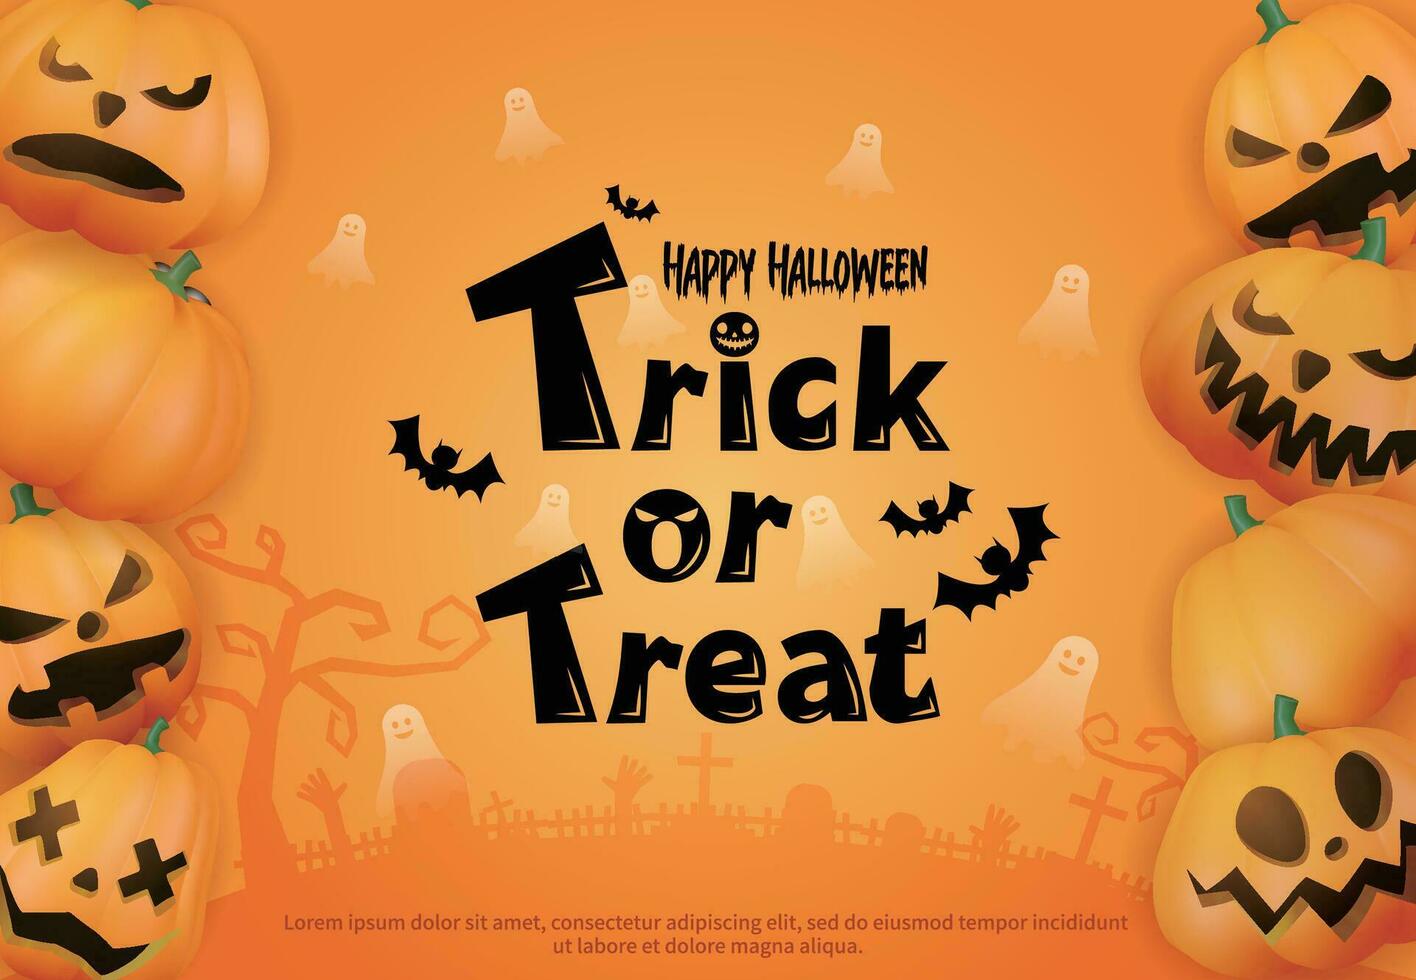 Trick or treat greeting card with pumpkins on orange background vector